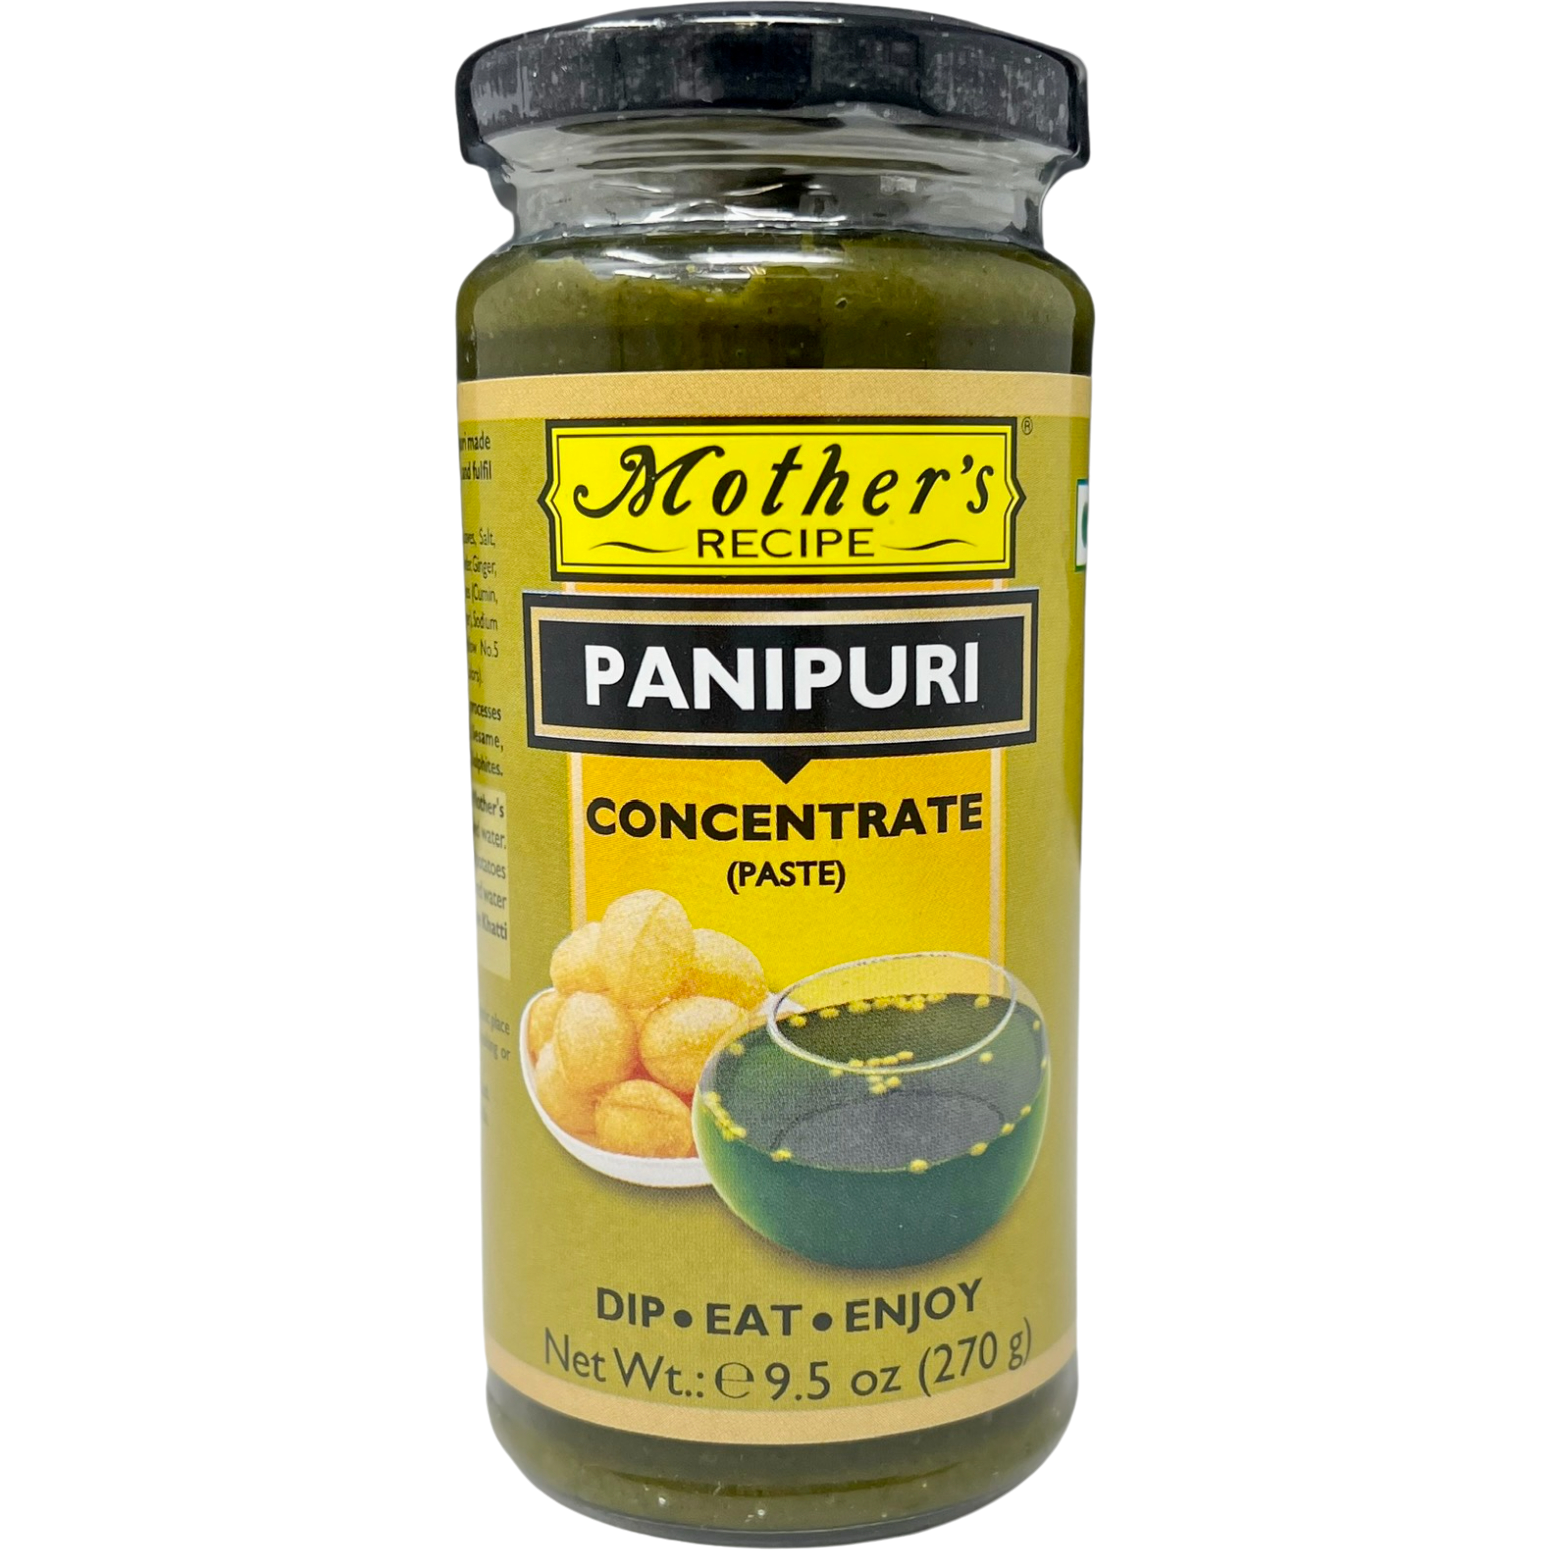 Mother's Recipe Panipuri Concentrate - 270 Gm (9.5 Oz)